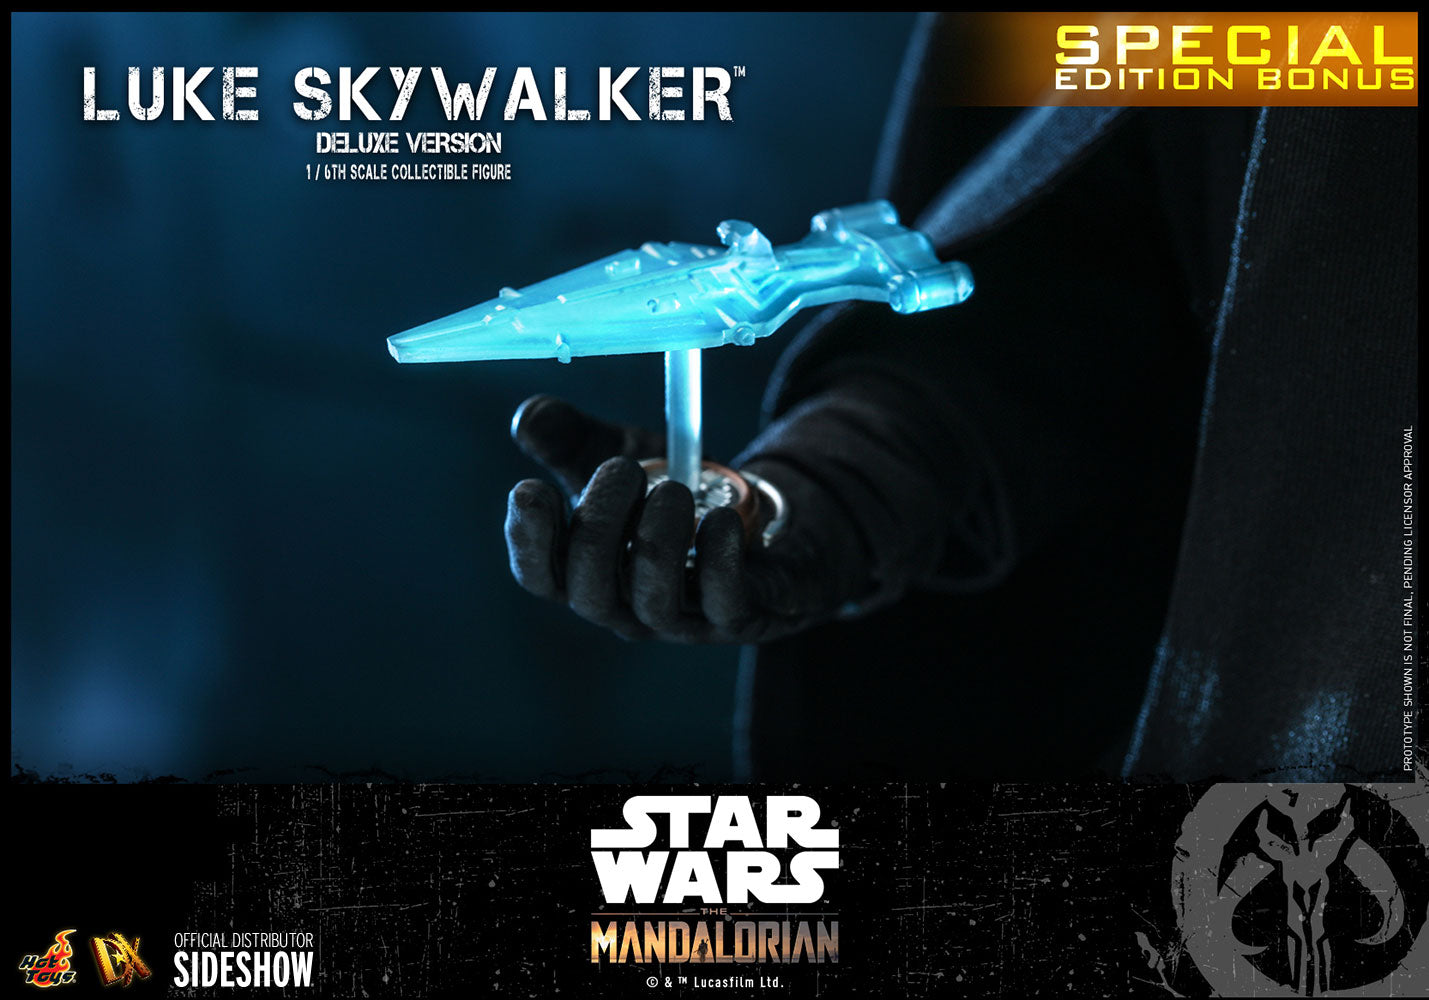 LUKE SKYWALKER (DELUXE VERSION) (SPECIAL EDITION)
Sixth Scale Figure by Hot Toys